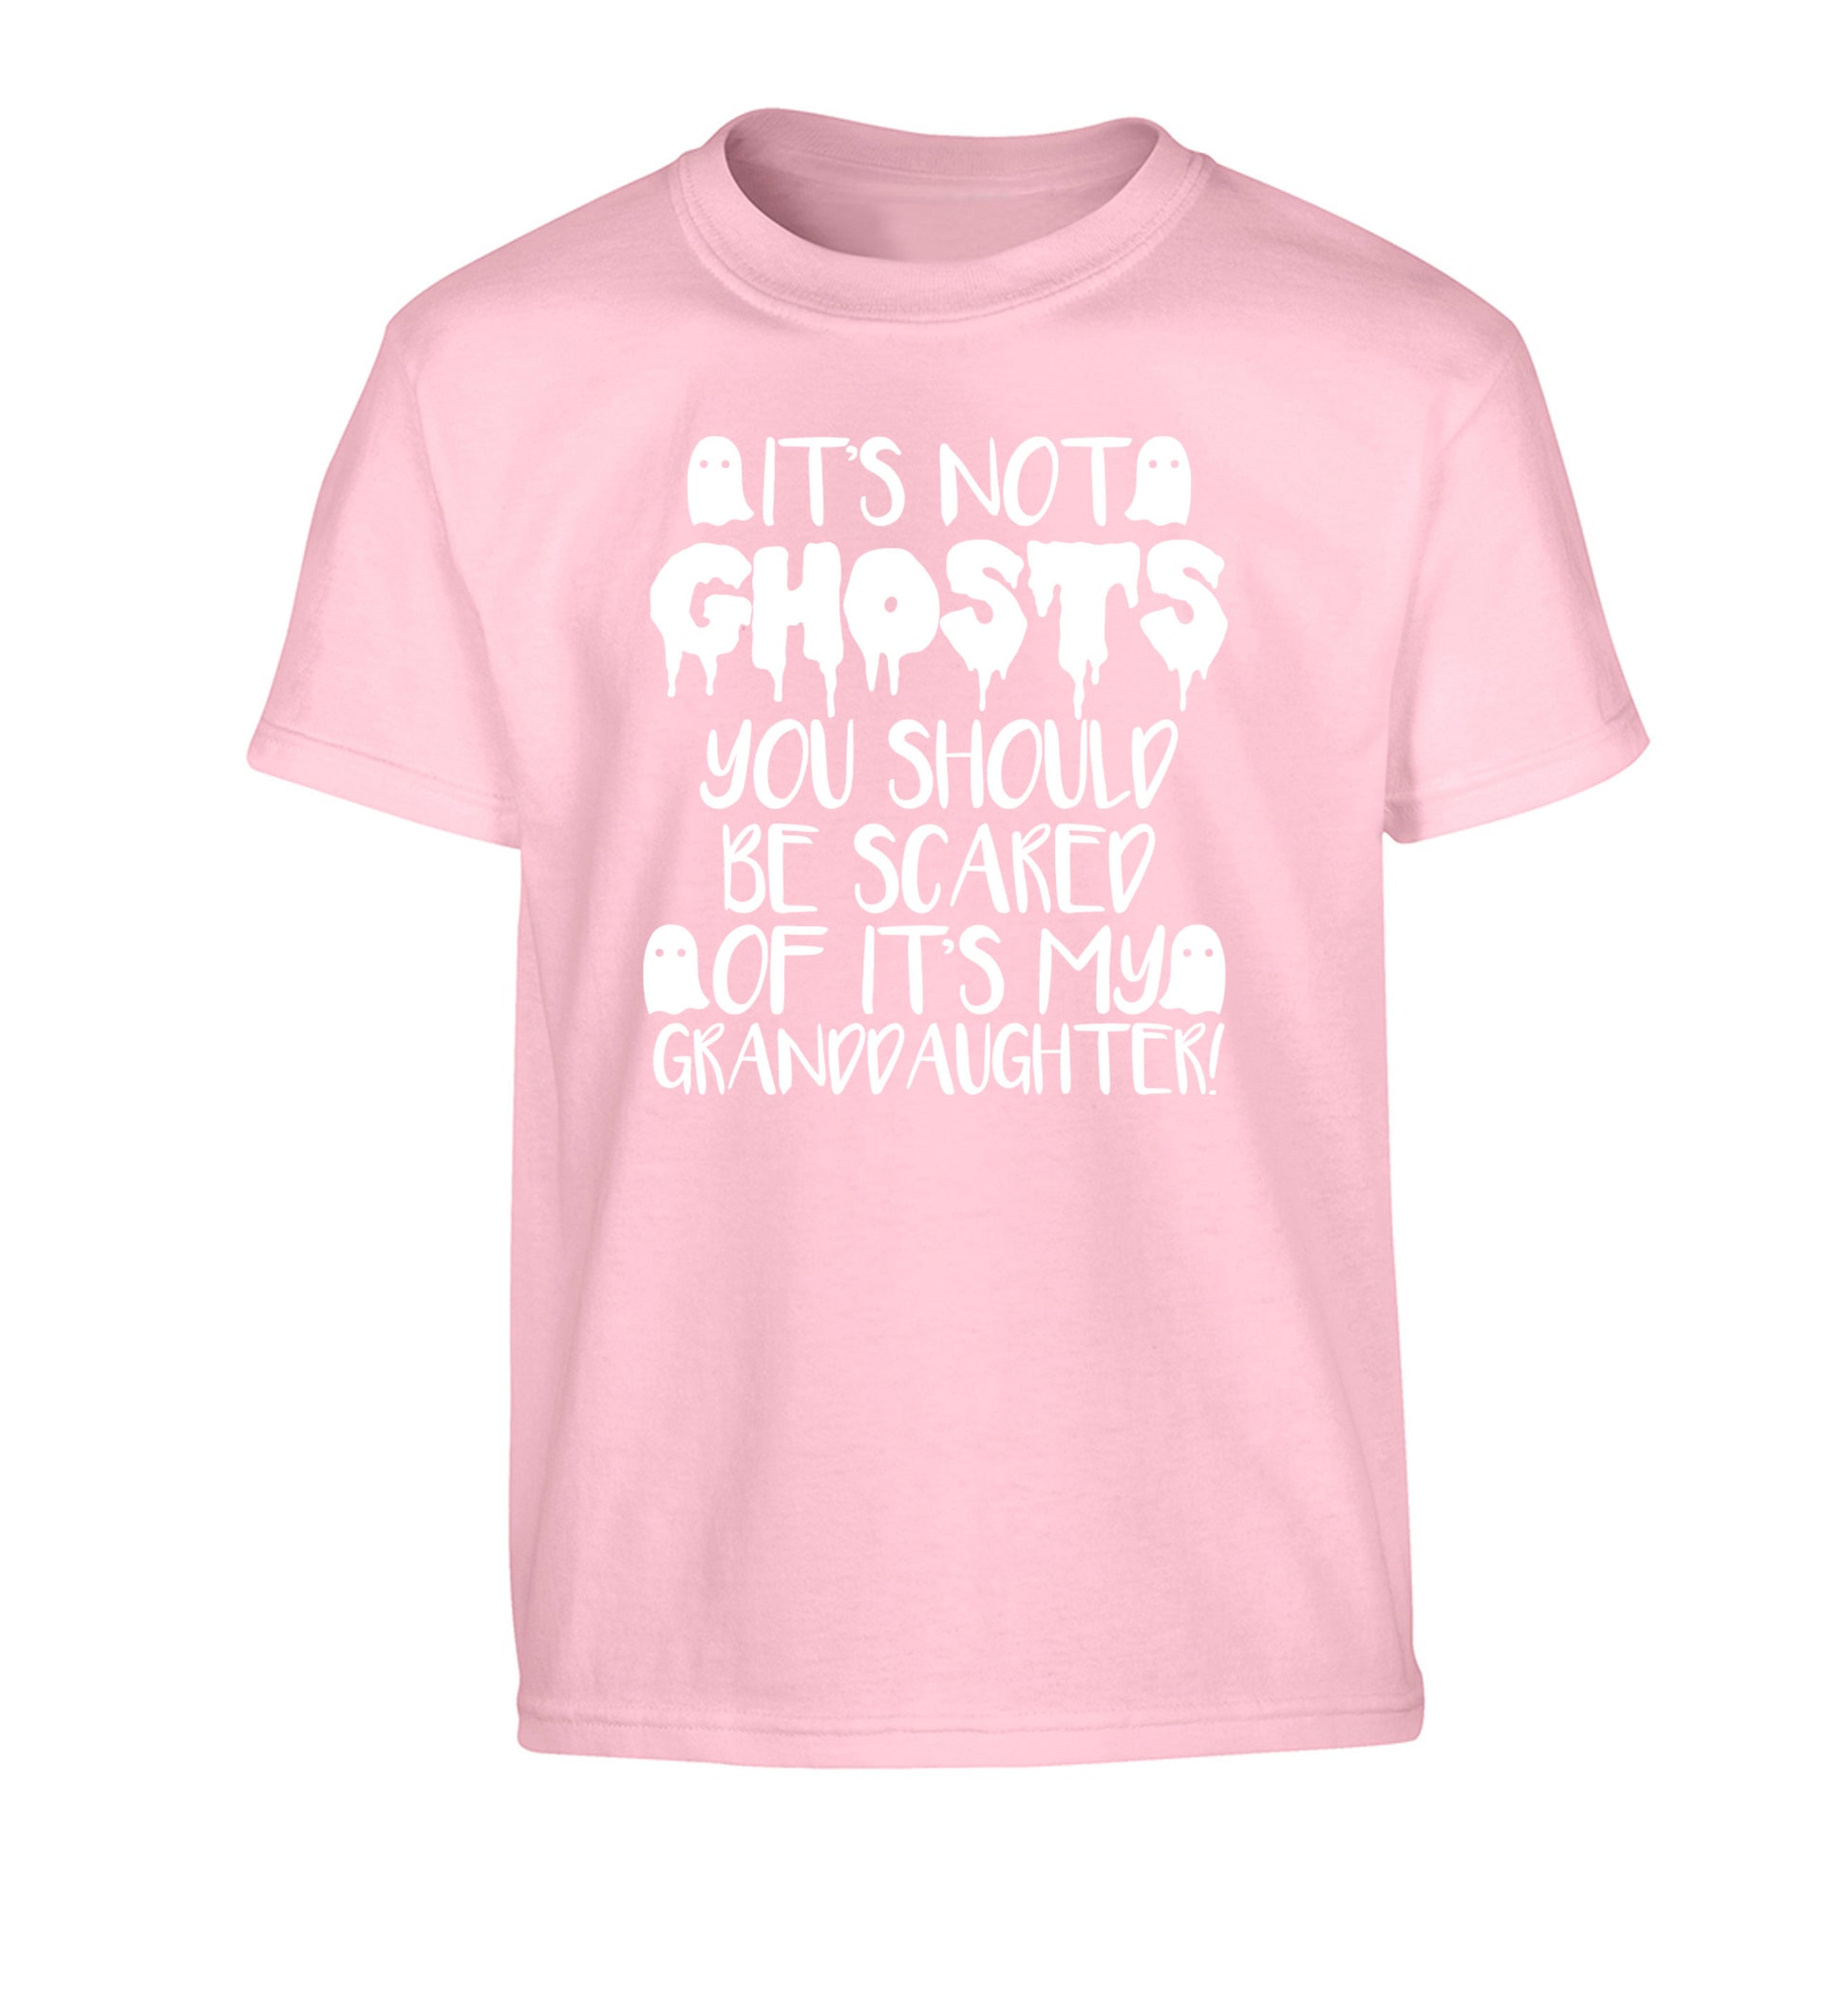 It's not ghosts you should be scared of it's my granddaughter! Children's light pink Tshirt 12-14 Years